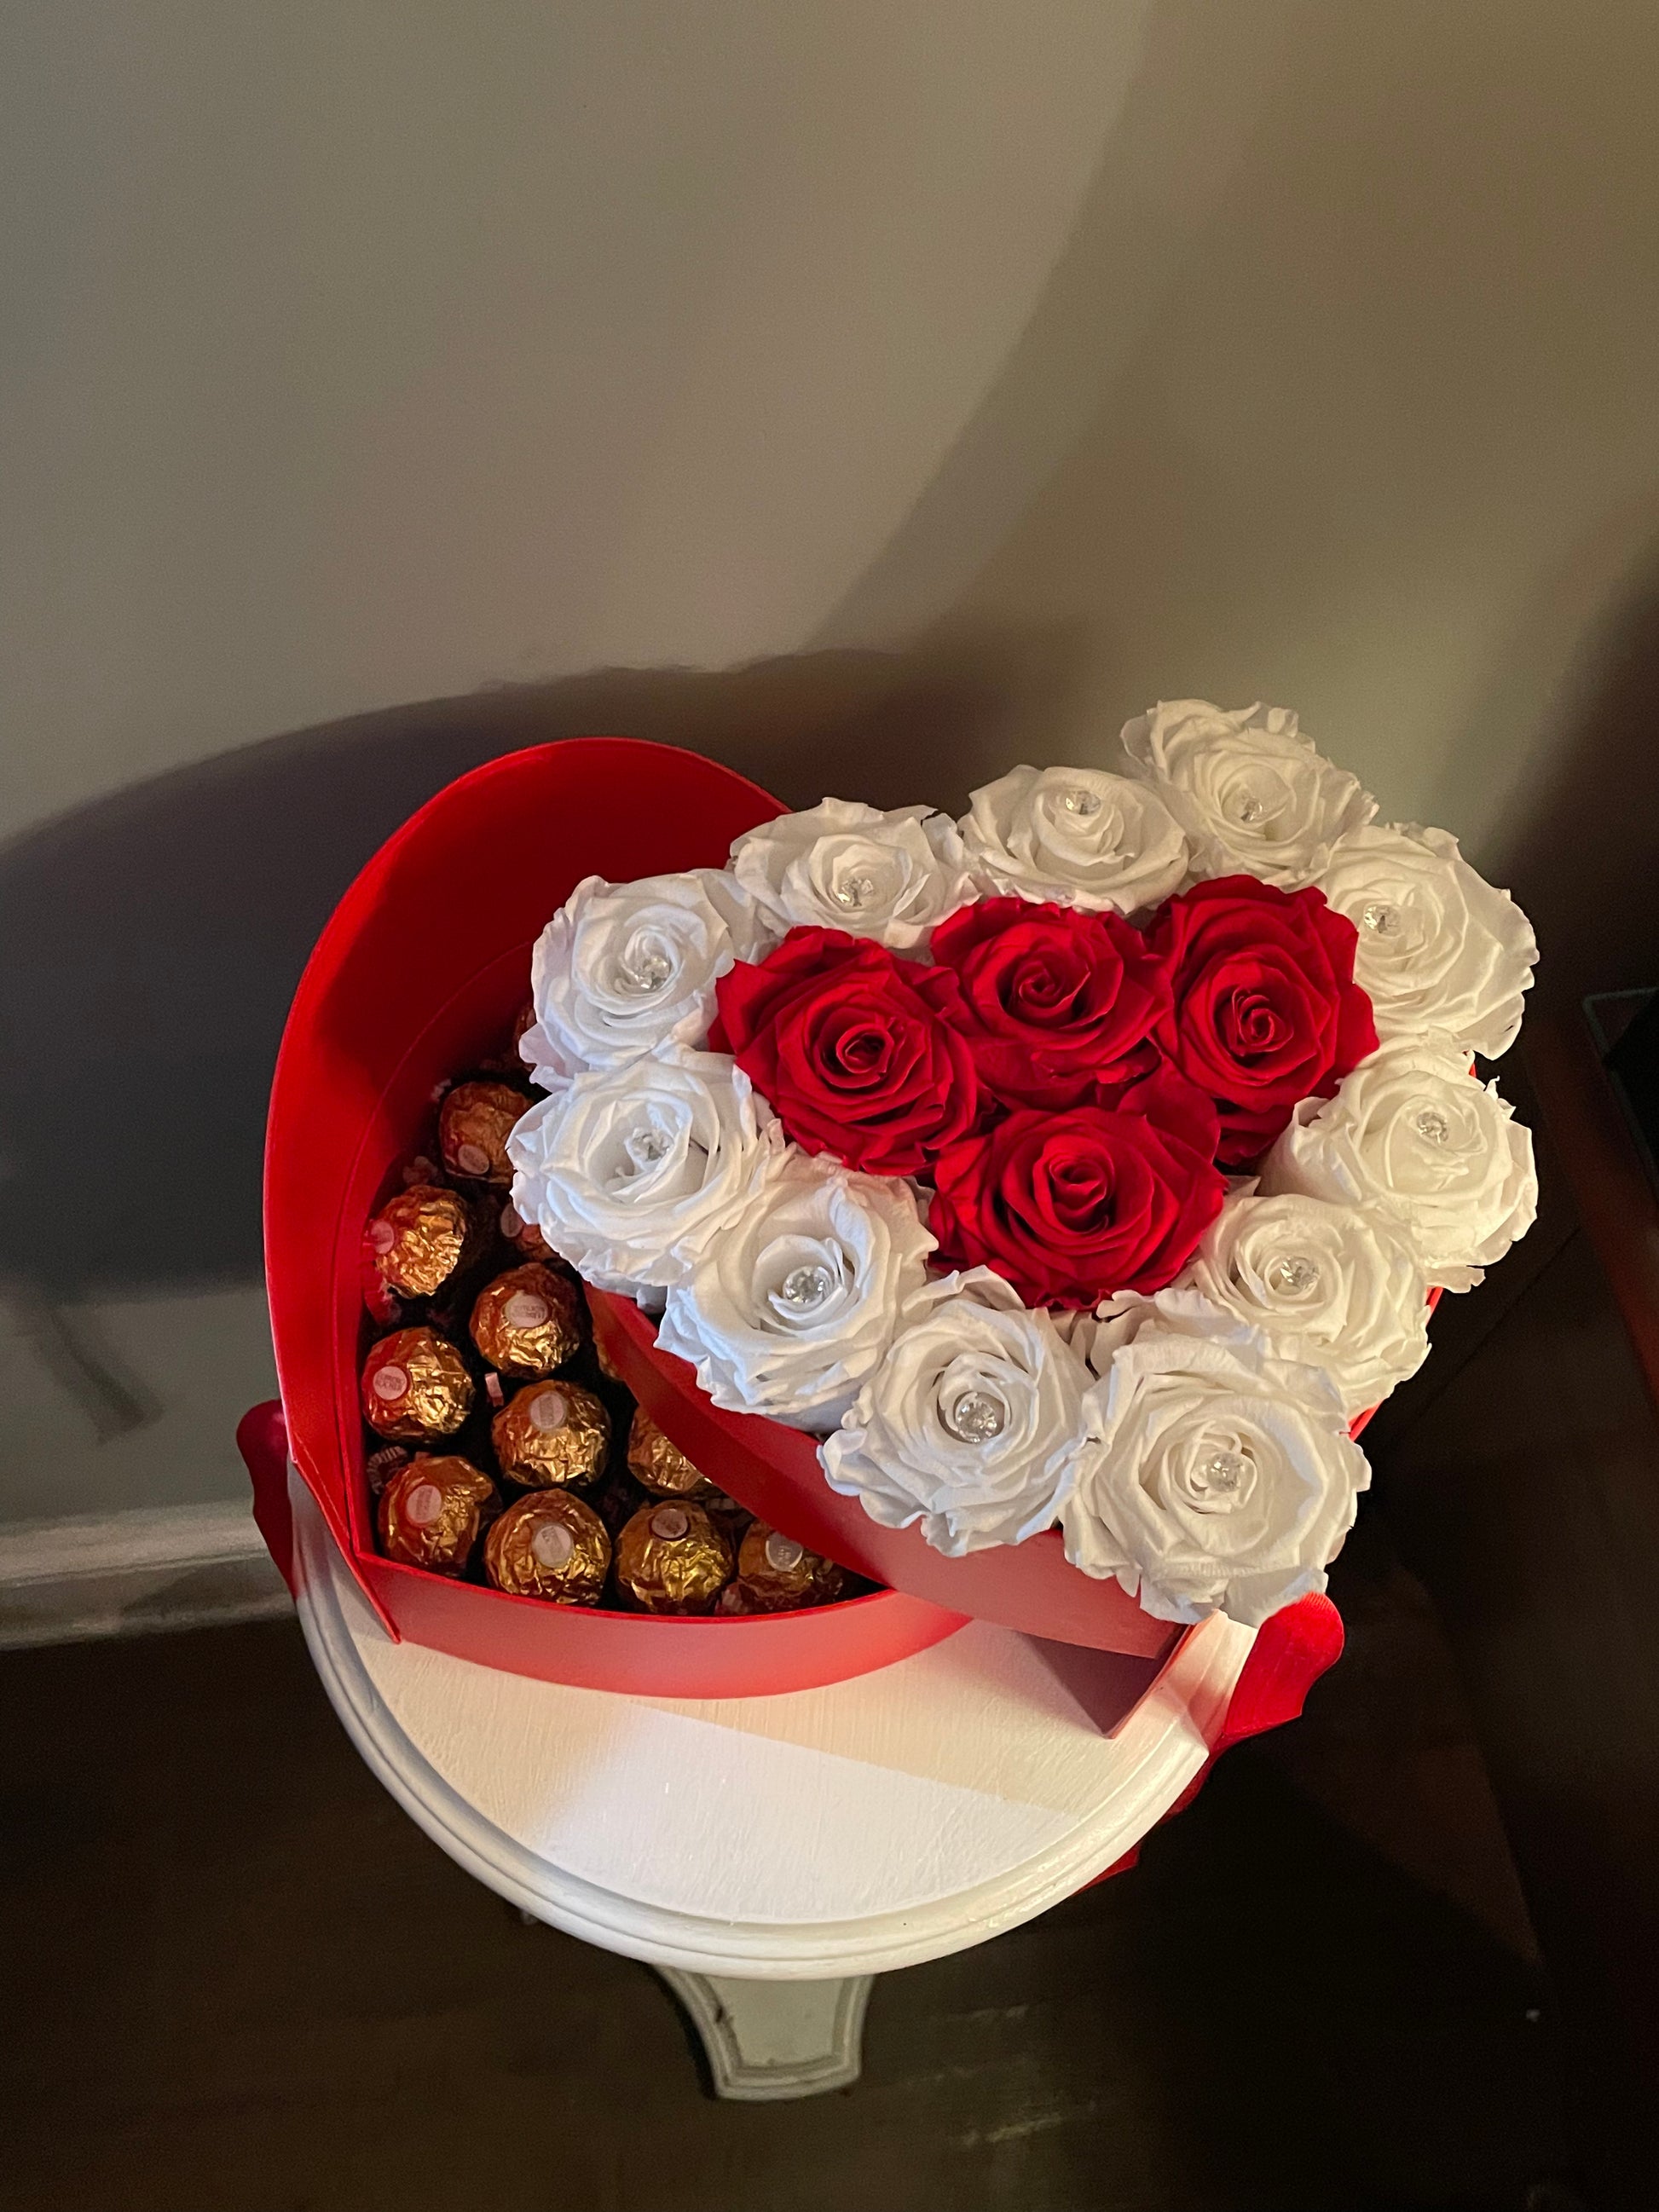 Heart-shaped box with roses and sweets